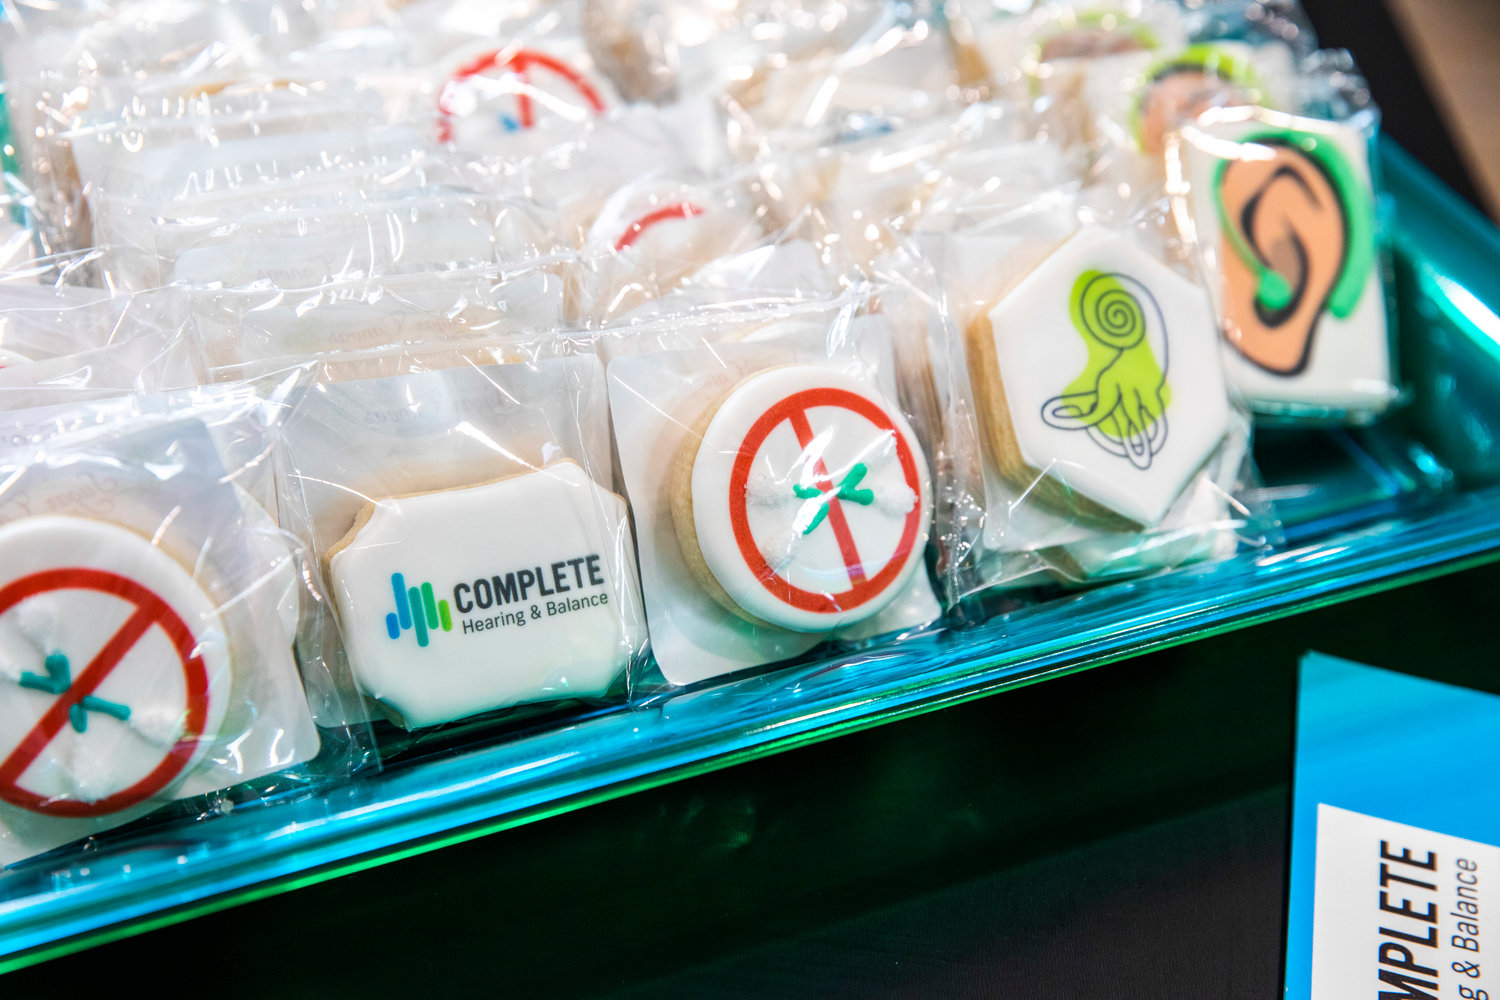 Decorated cookies sit on display during a Centralia-Chehalis Chamber of Commerce ribbon cutting ceremony at Complete Hearing and Balance in Chehalis on Thursday.